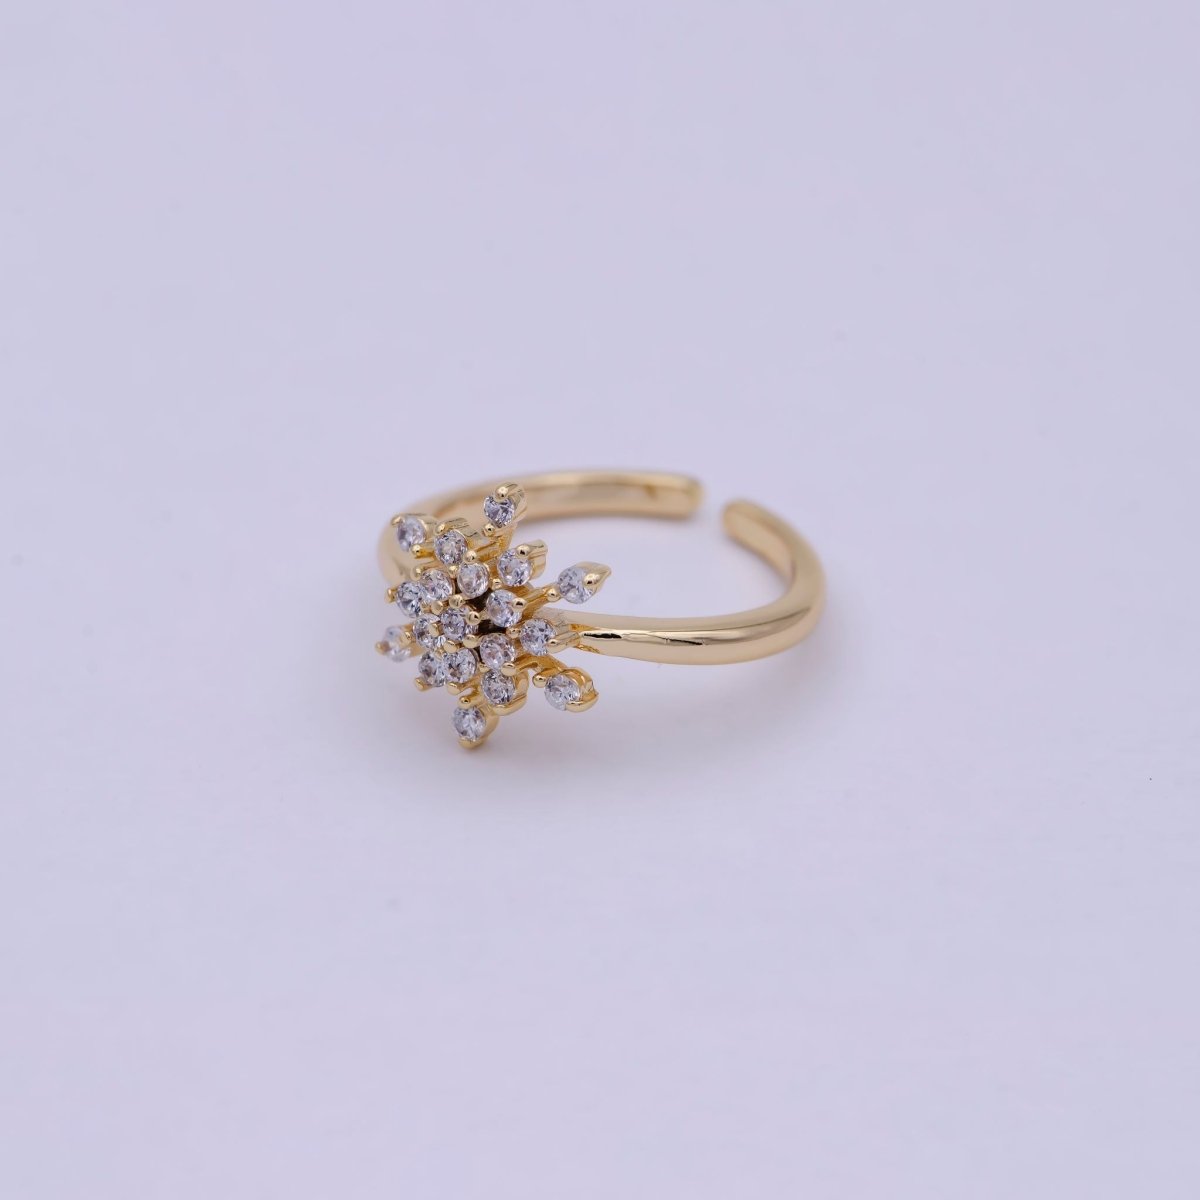 Gold Filled Snowflake with Pink Green CZ Ring For Woman Jewelry Finger Ring Open Adjustable U-147 U-148 U-218 - DLUXCA